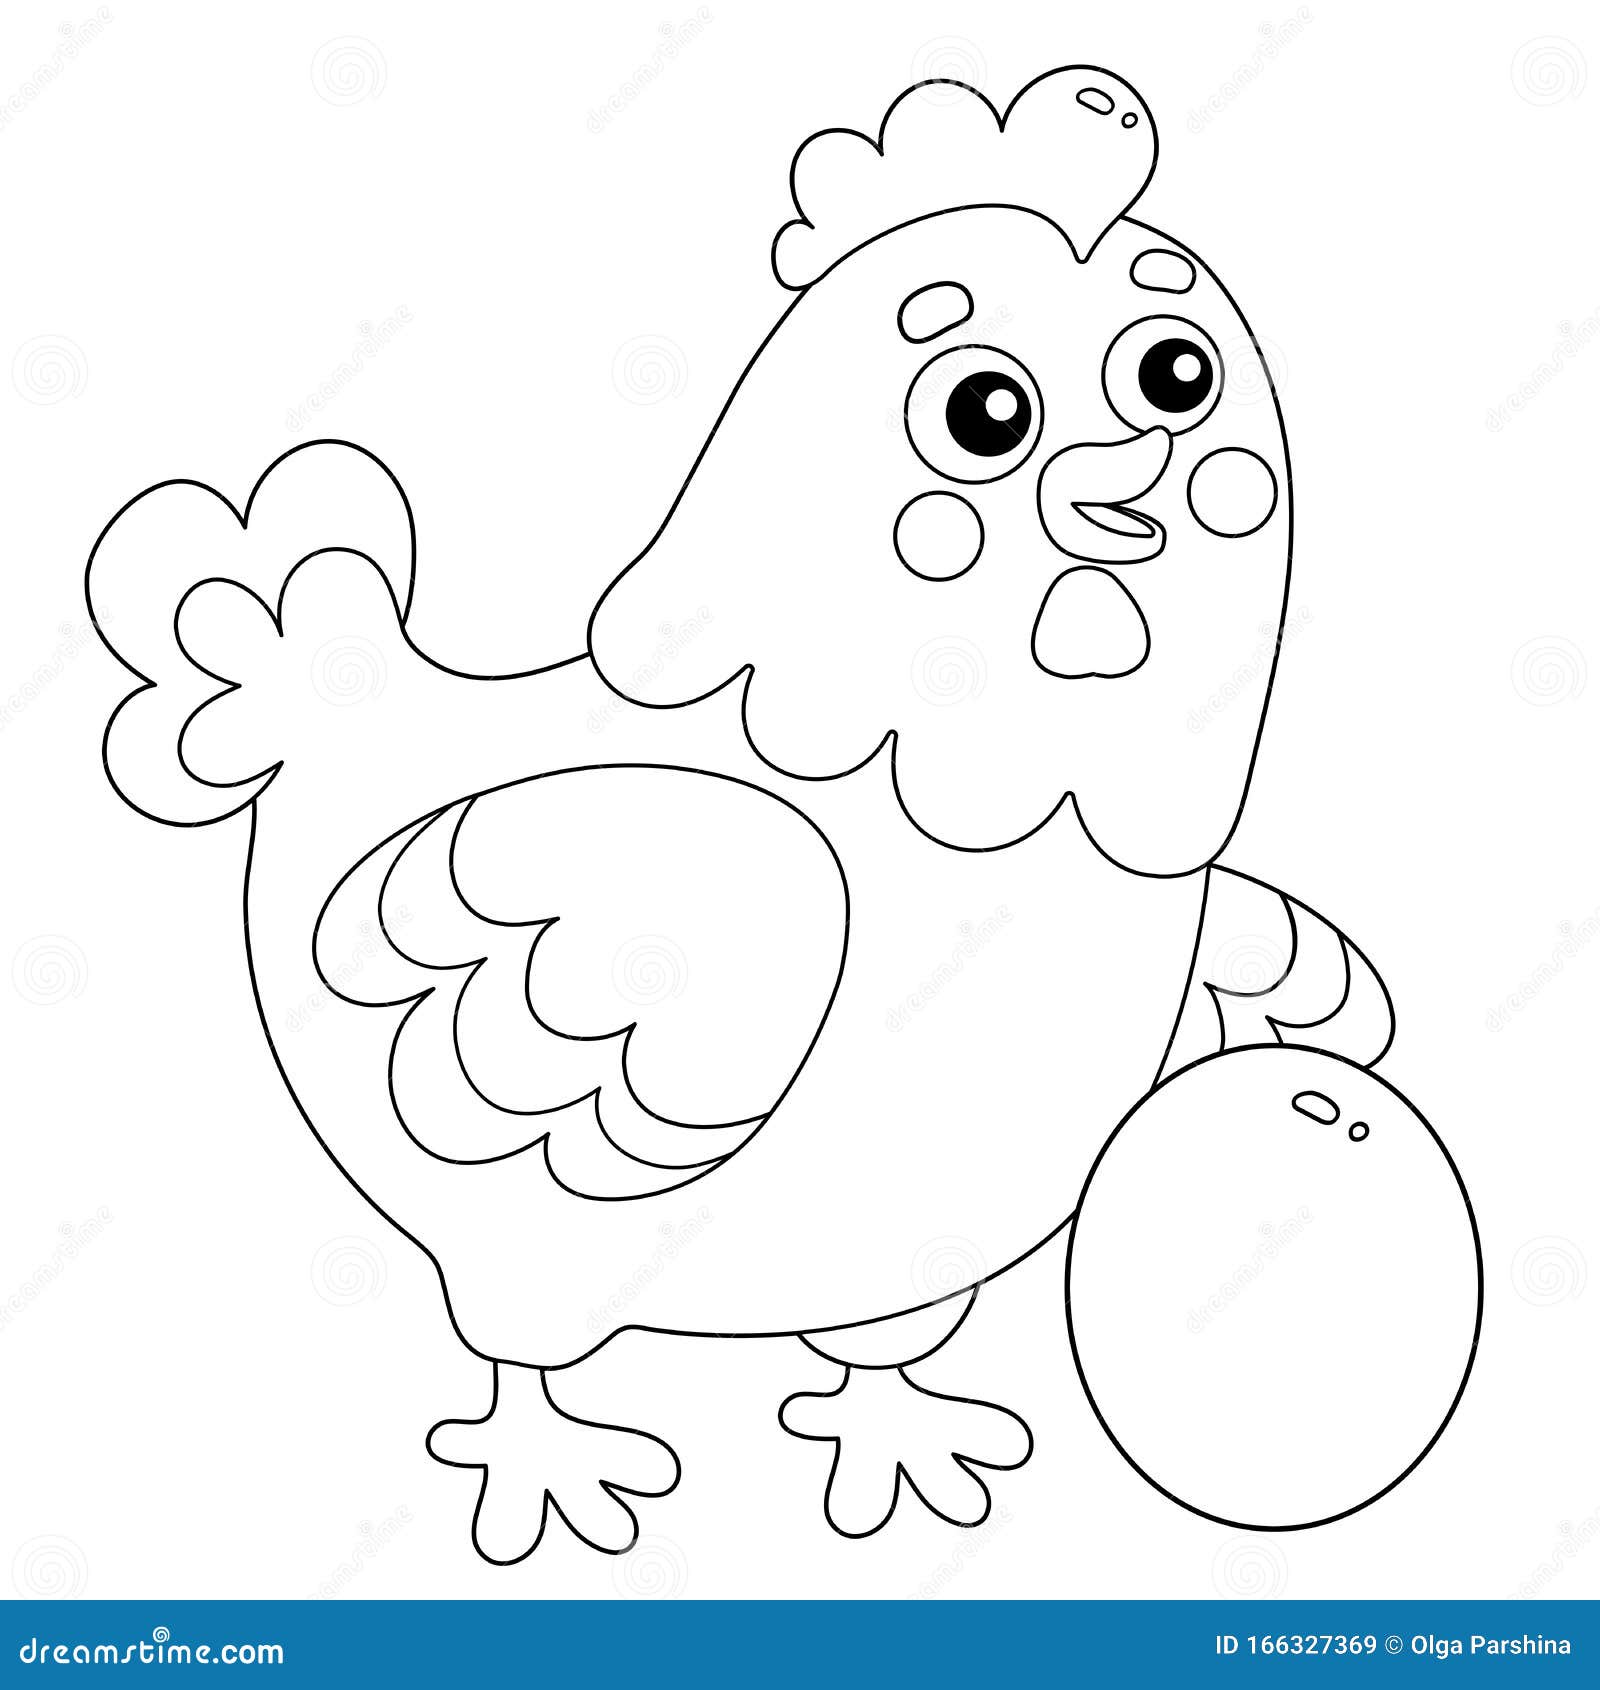 Download Coloring Page Outline Of Cartoon Chicken Or Hen With Egg ...